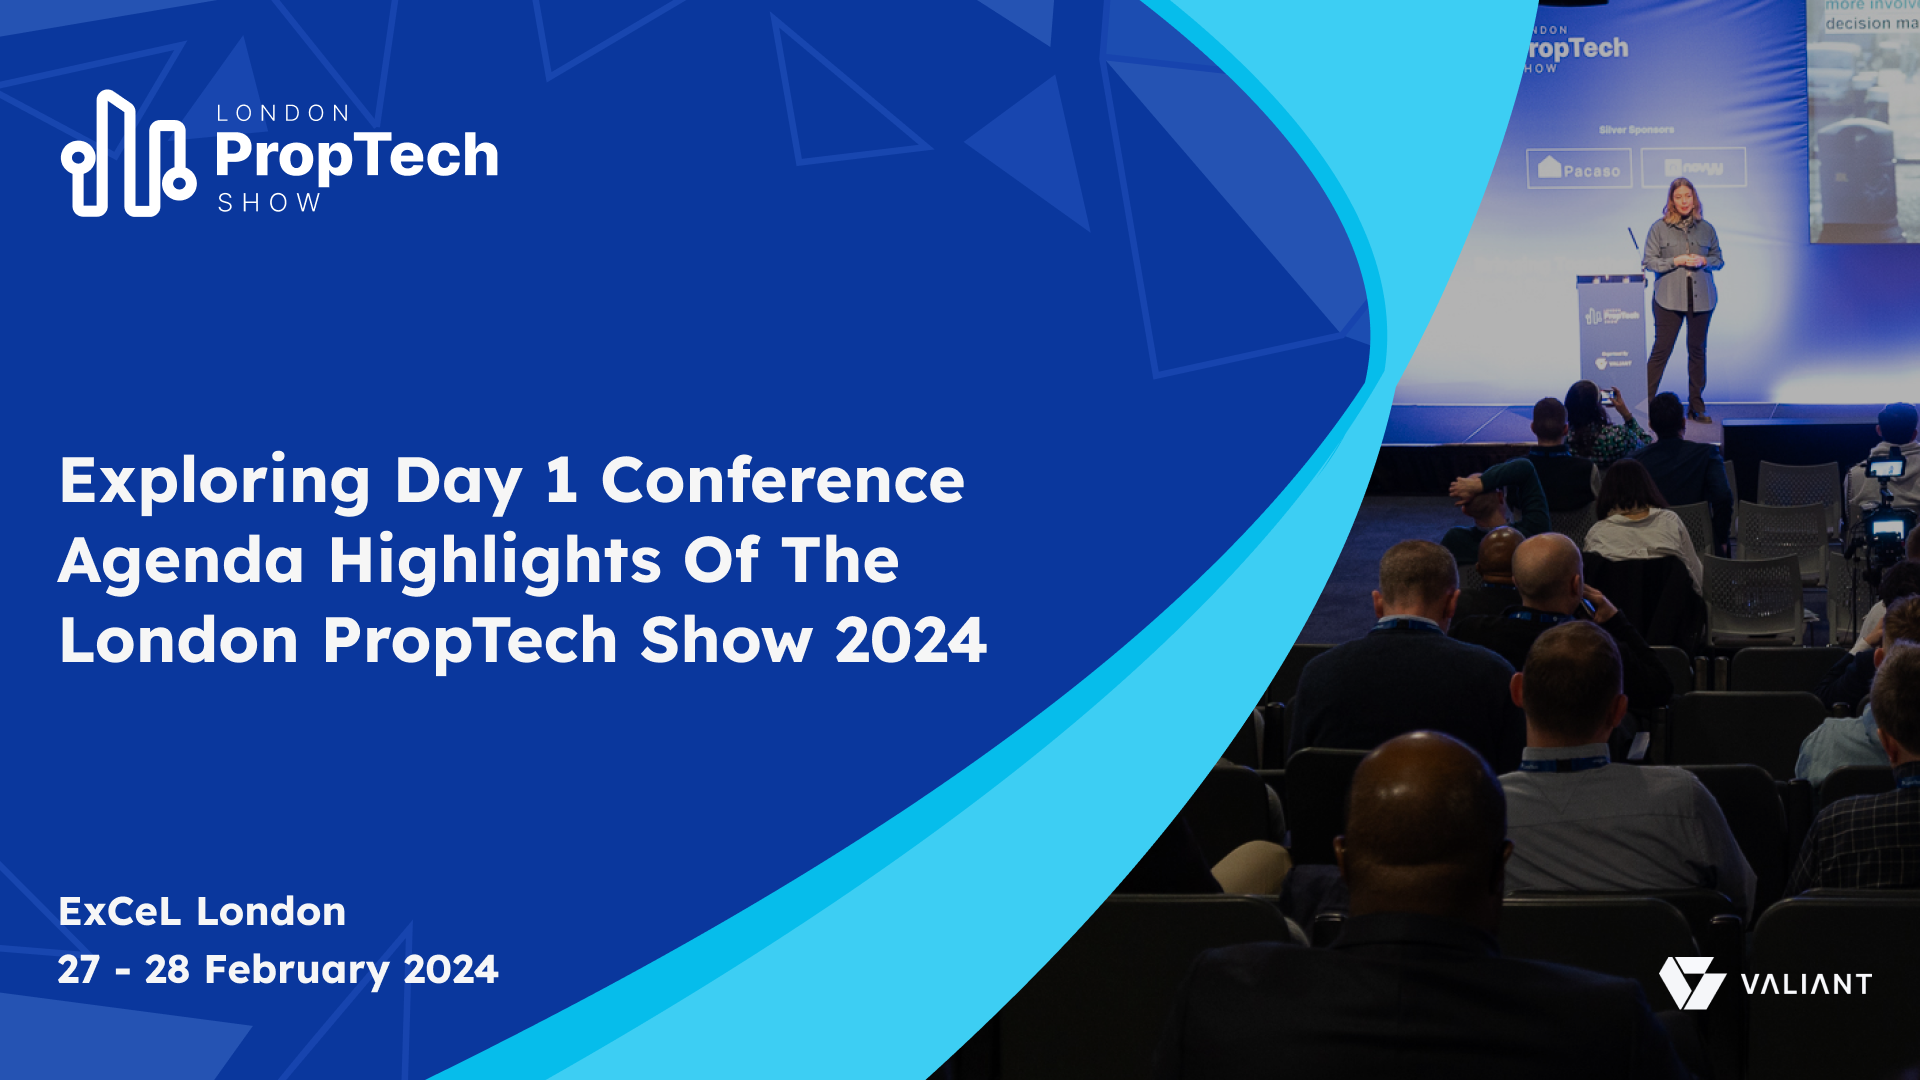 Exploring Day 1 Conference Agenda Highlights Of London PropTech Show